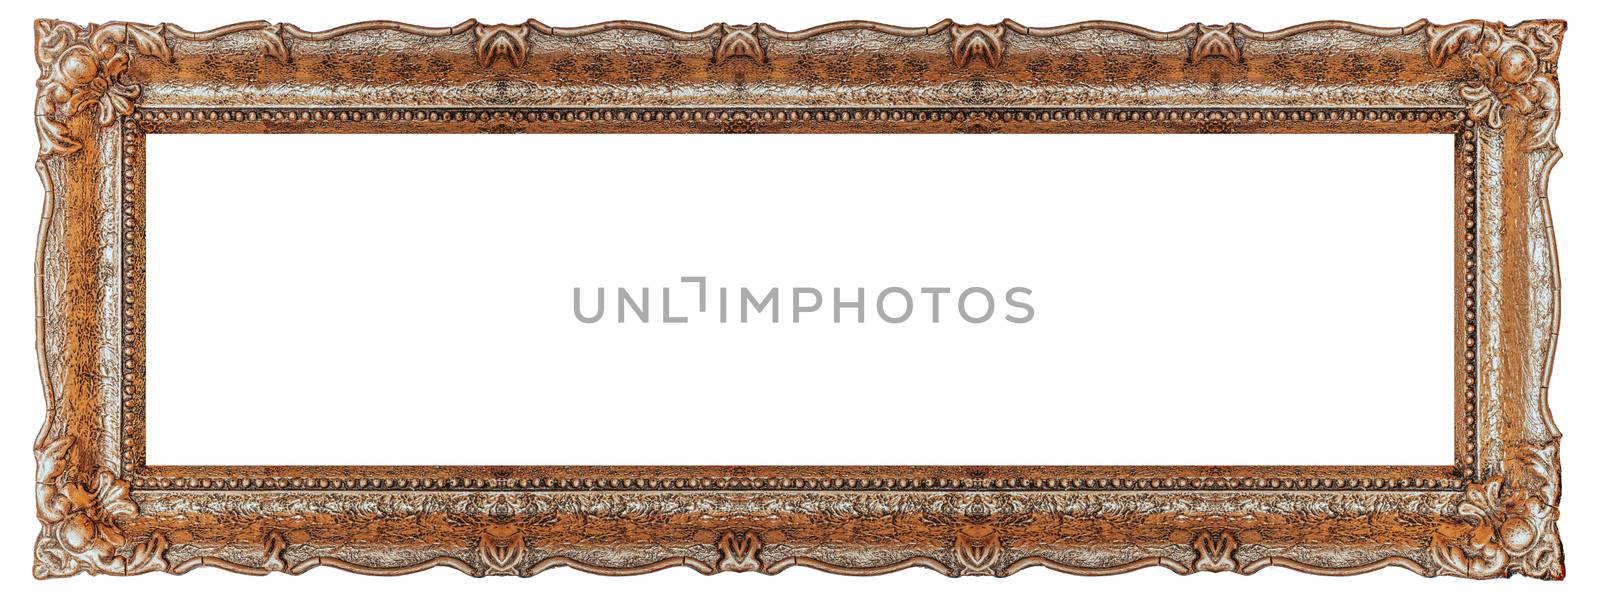 Copper picture frame with empty background copy space - Stock im by adamr